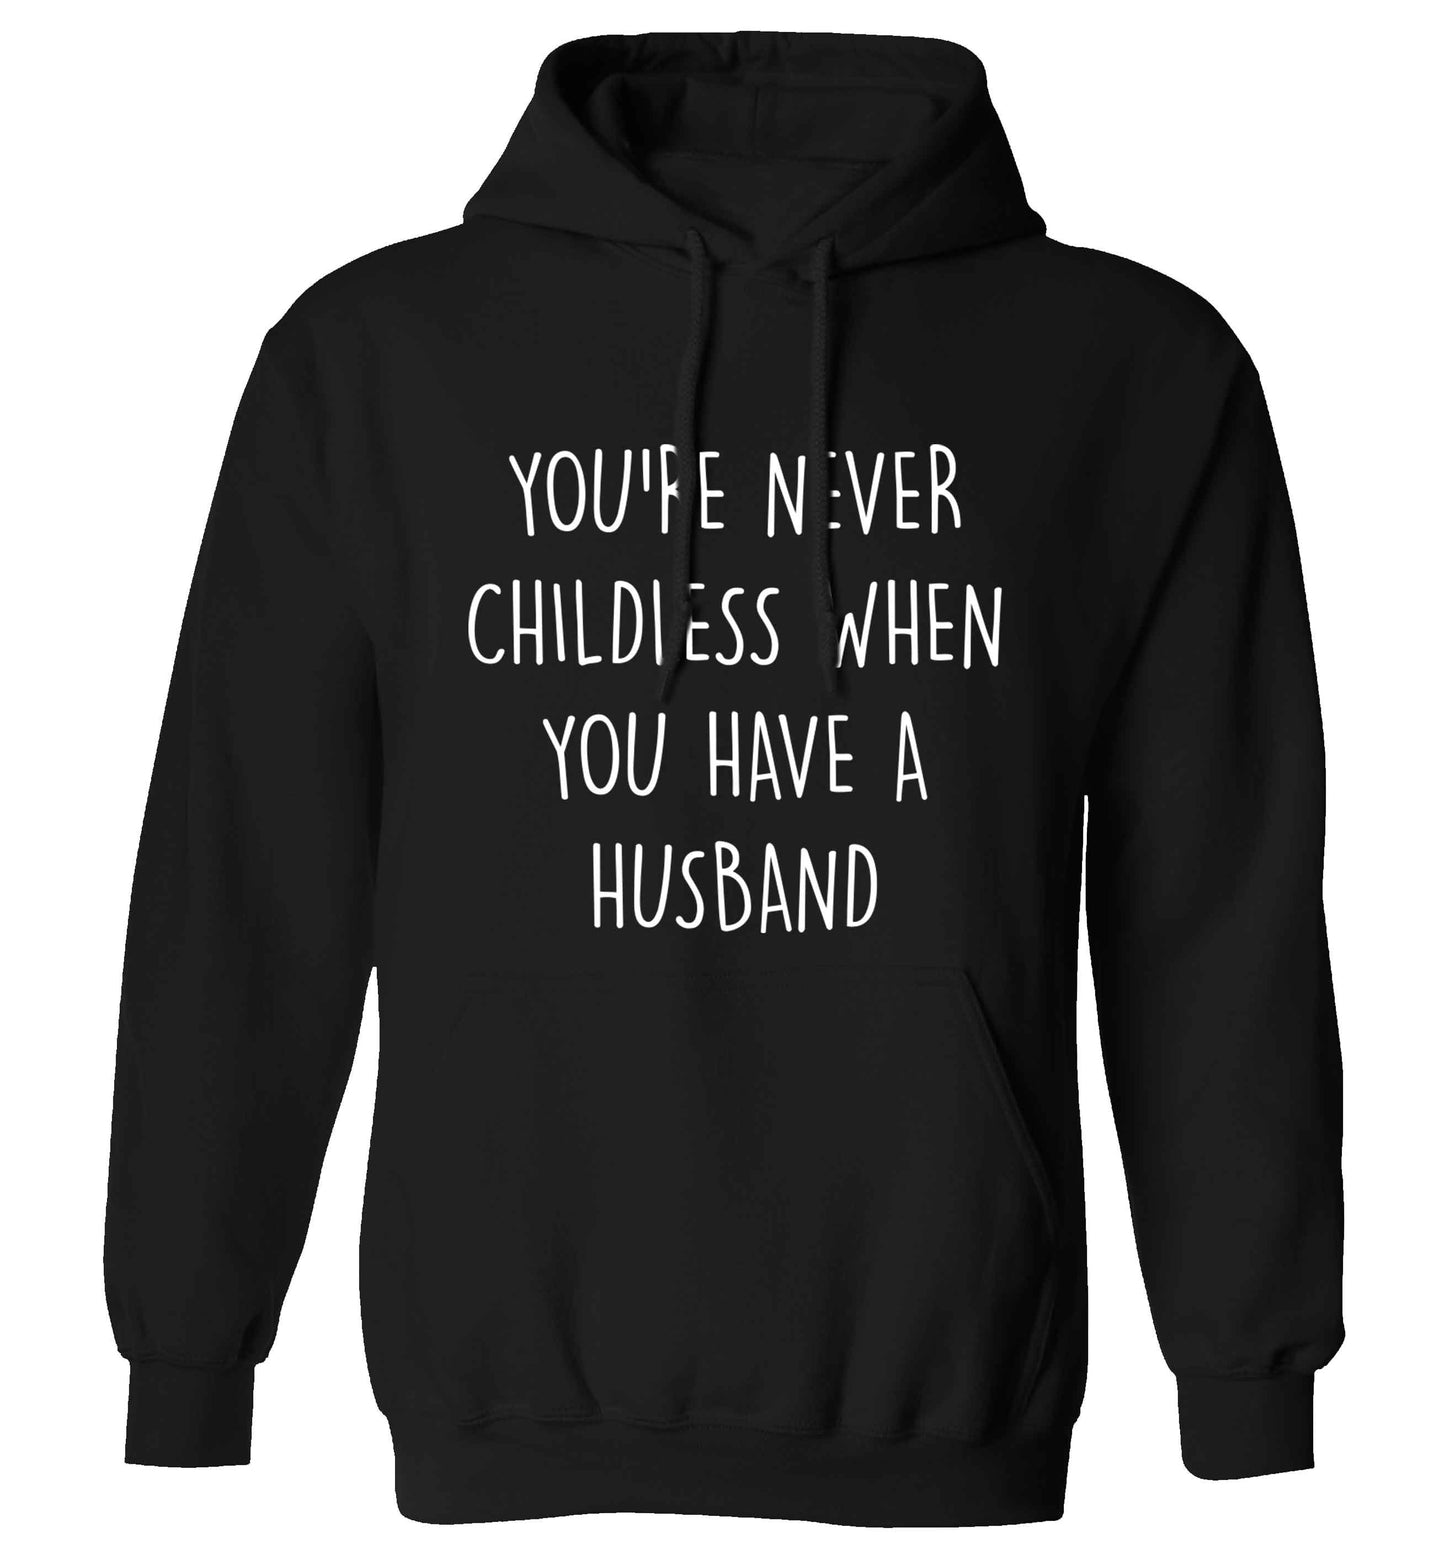 You're never childess when you have a husband adults unisex black hoodie 2XL